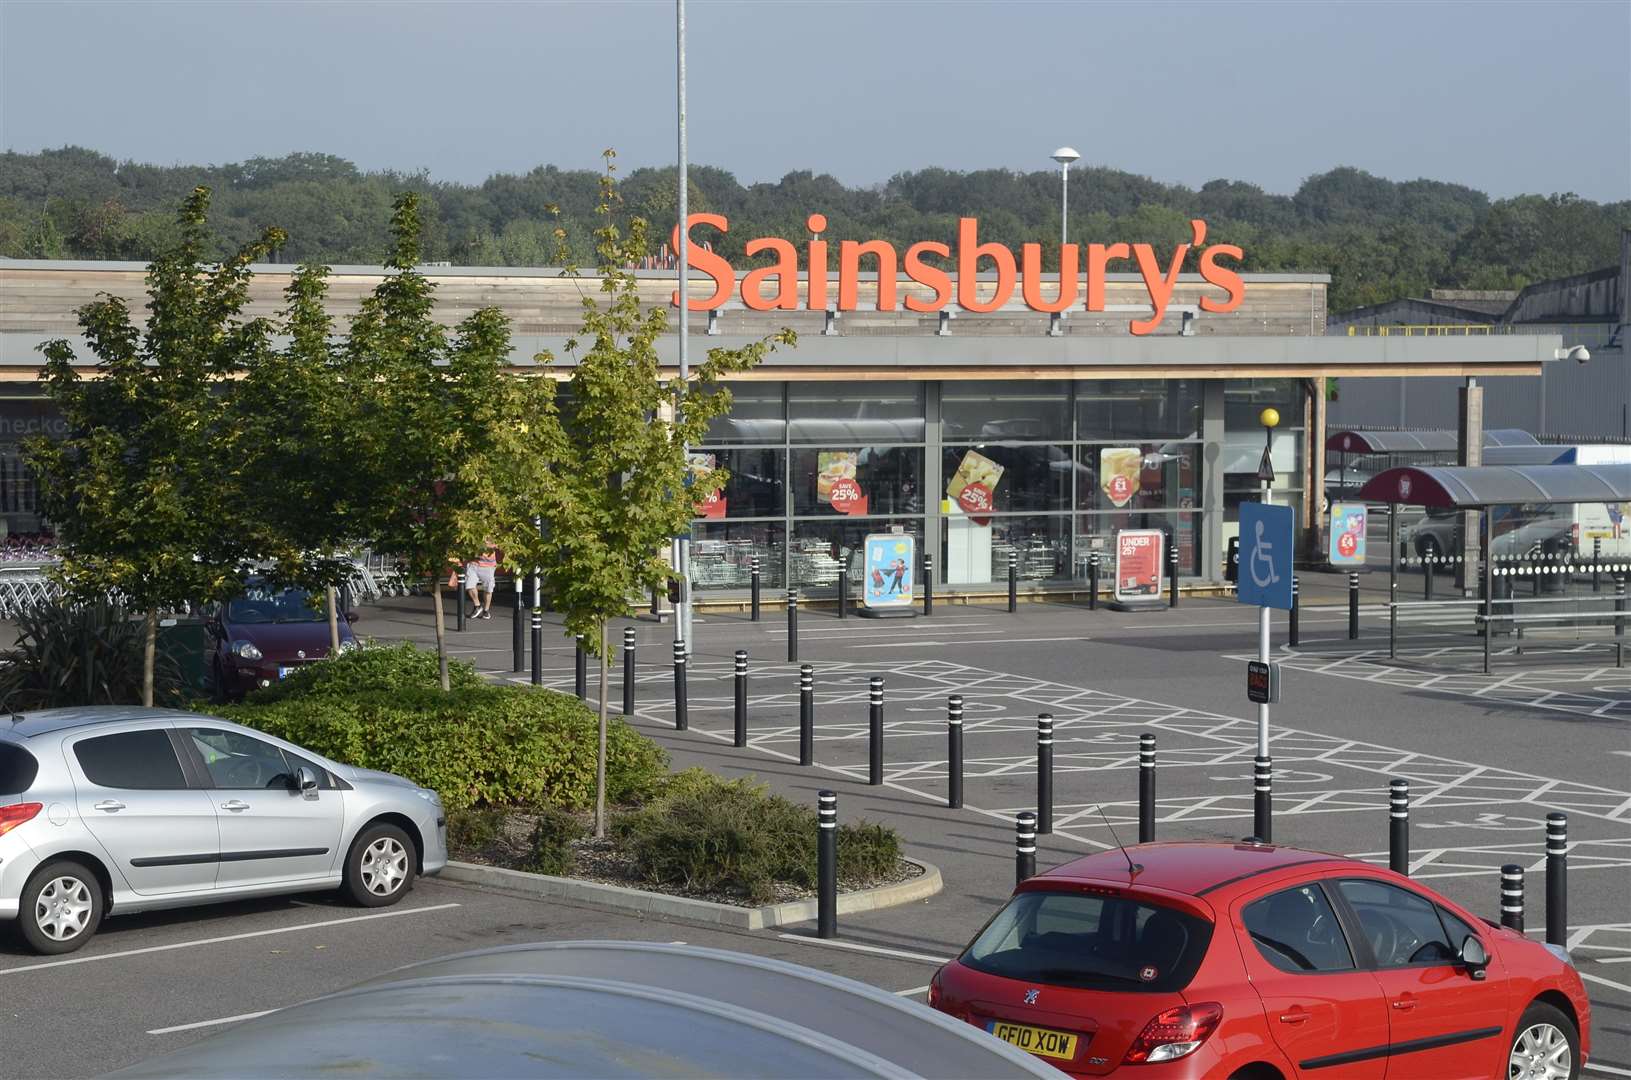 The Sainsbury's store in Bysing Wood Road, Faversham